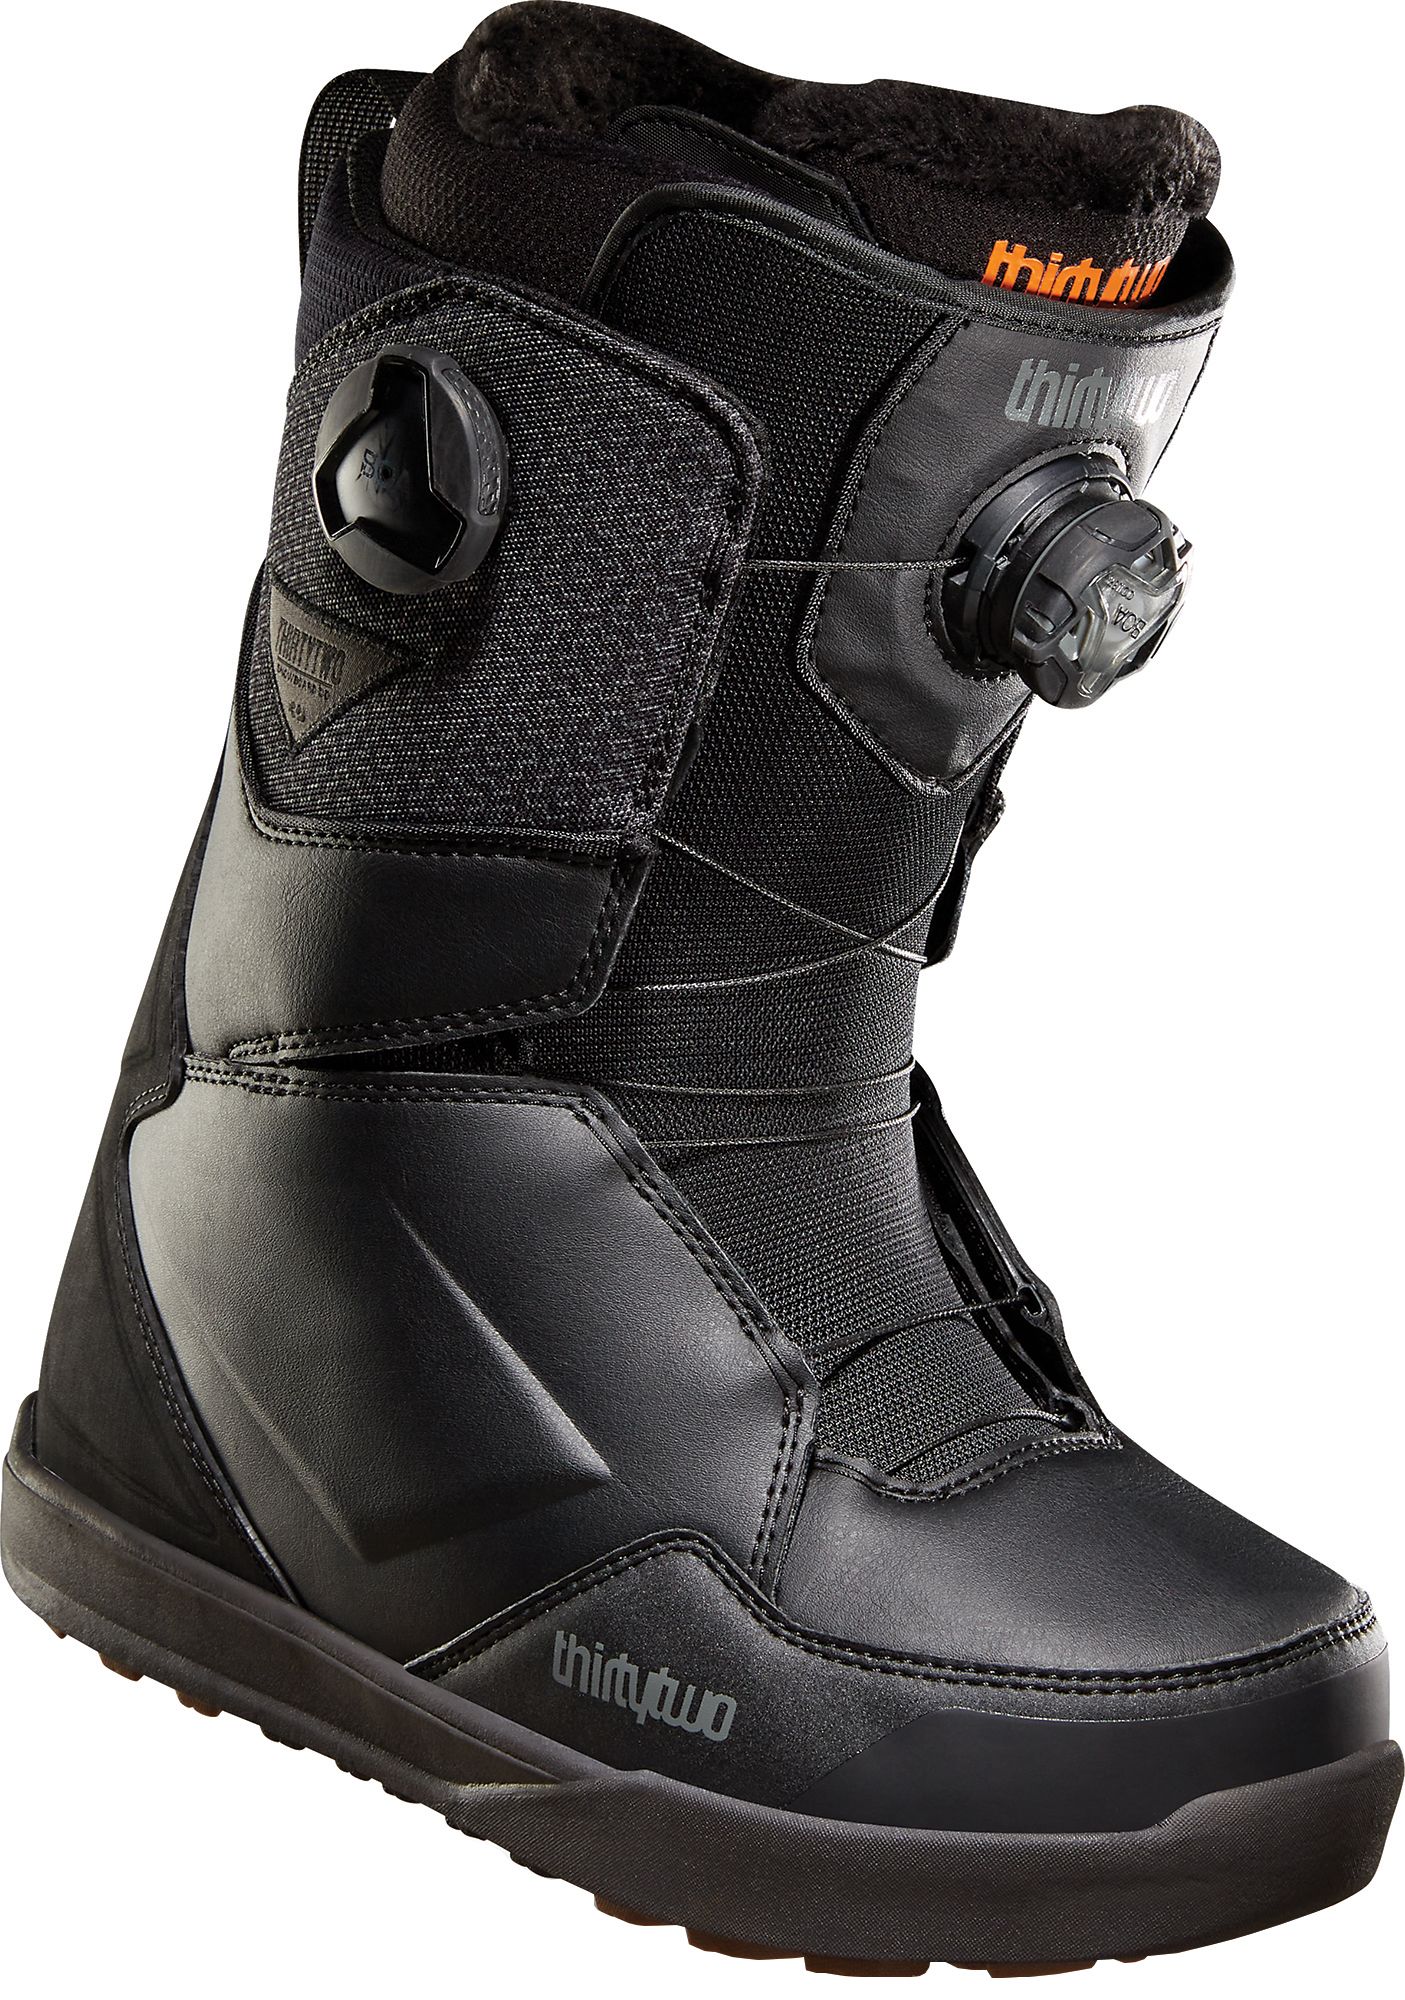 Photos - Ski Boots ThirtyTwo Lashed Double BOA Women's Snowboard Boots, Size 10 | Mother’s Da 